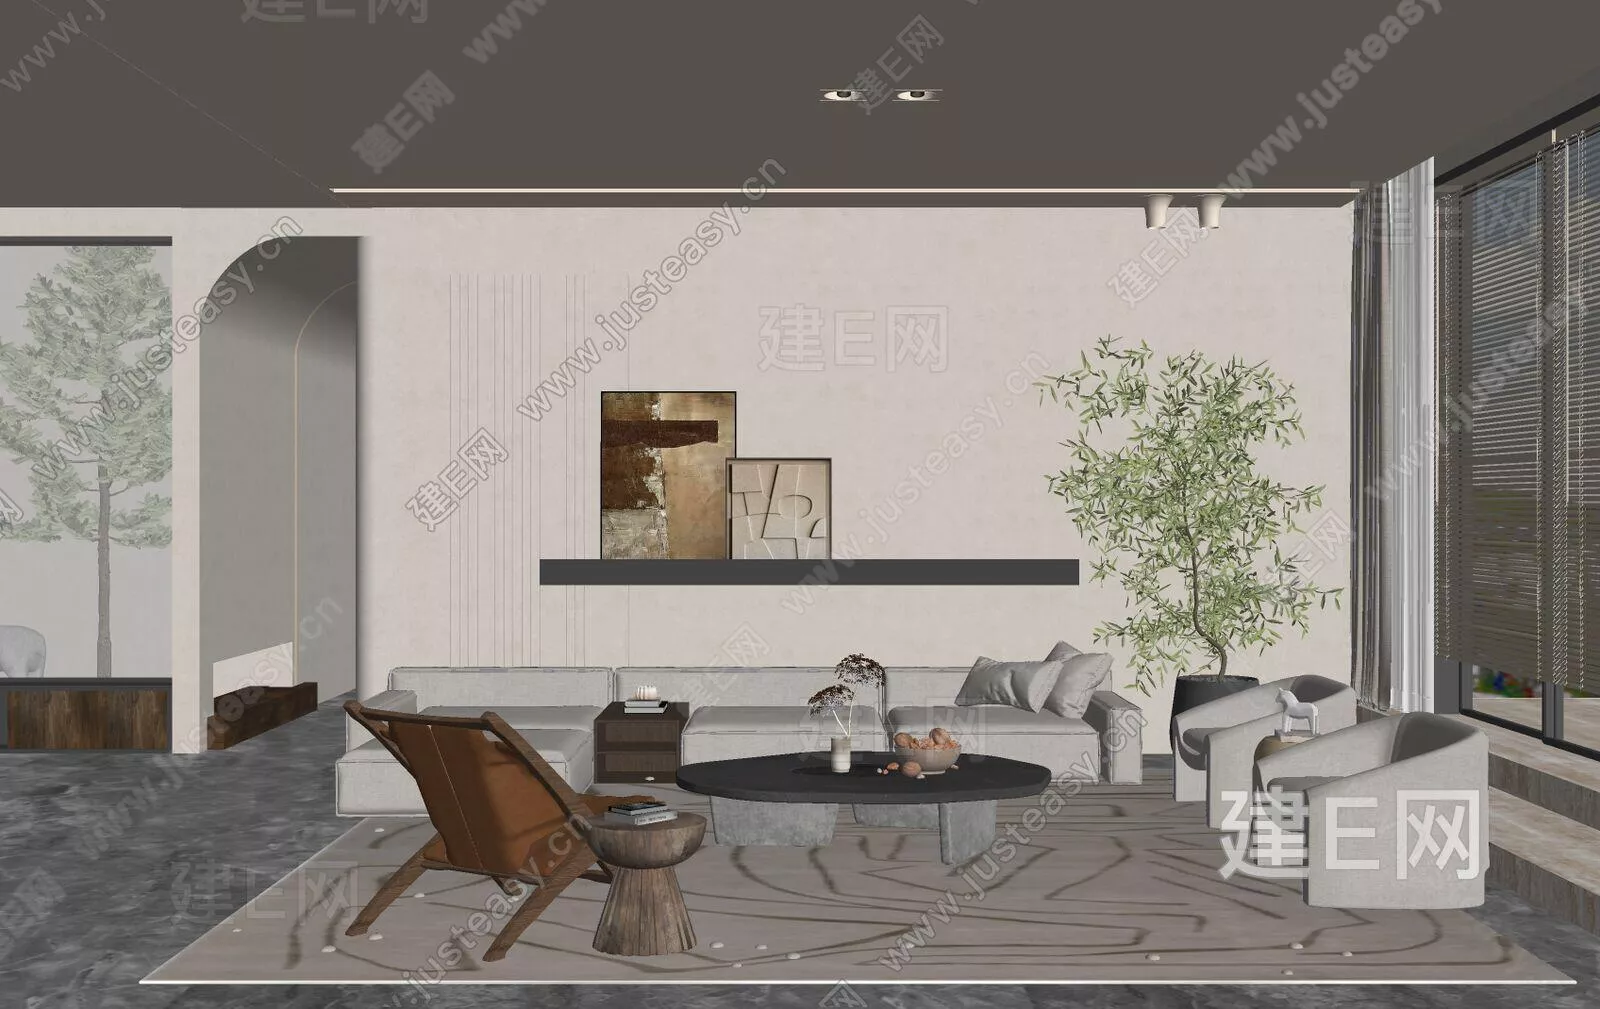 CHINESE LIVING ROOM - SKETCHUP 3D SCENE - ENSCAPE - 114836789